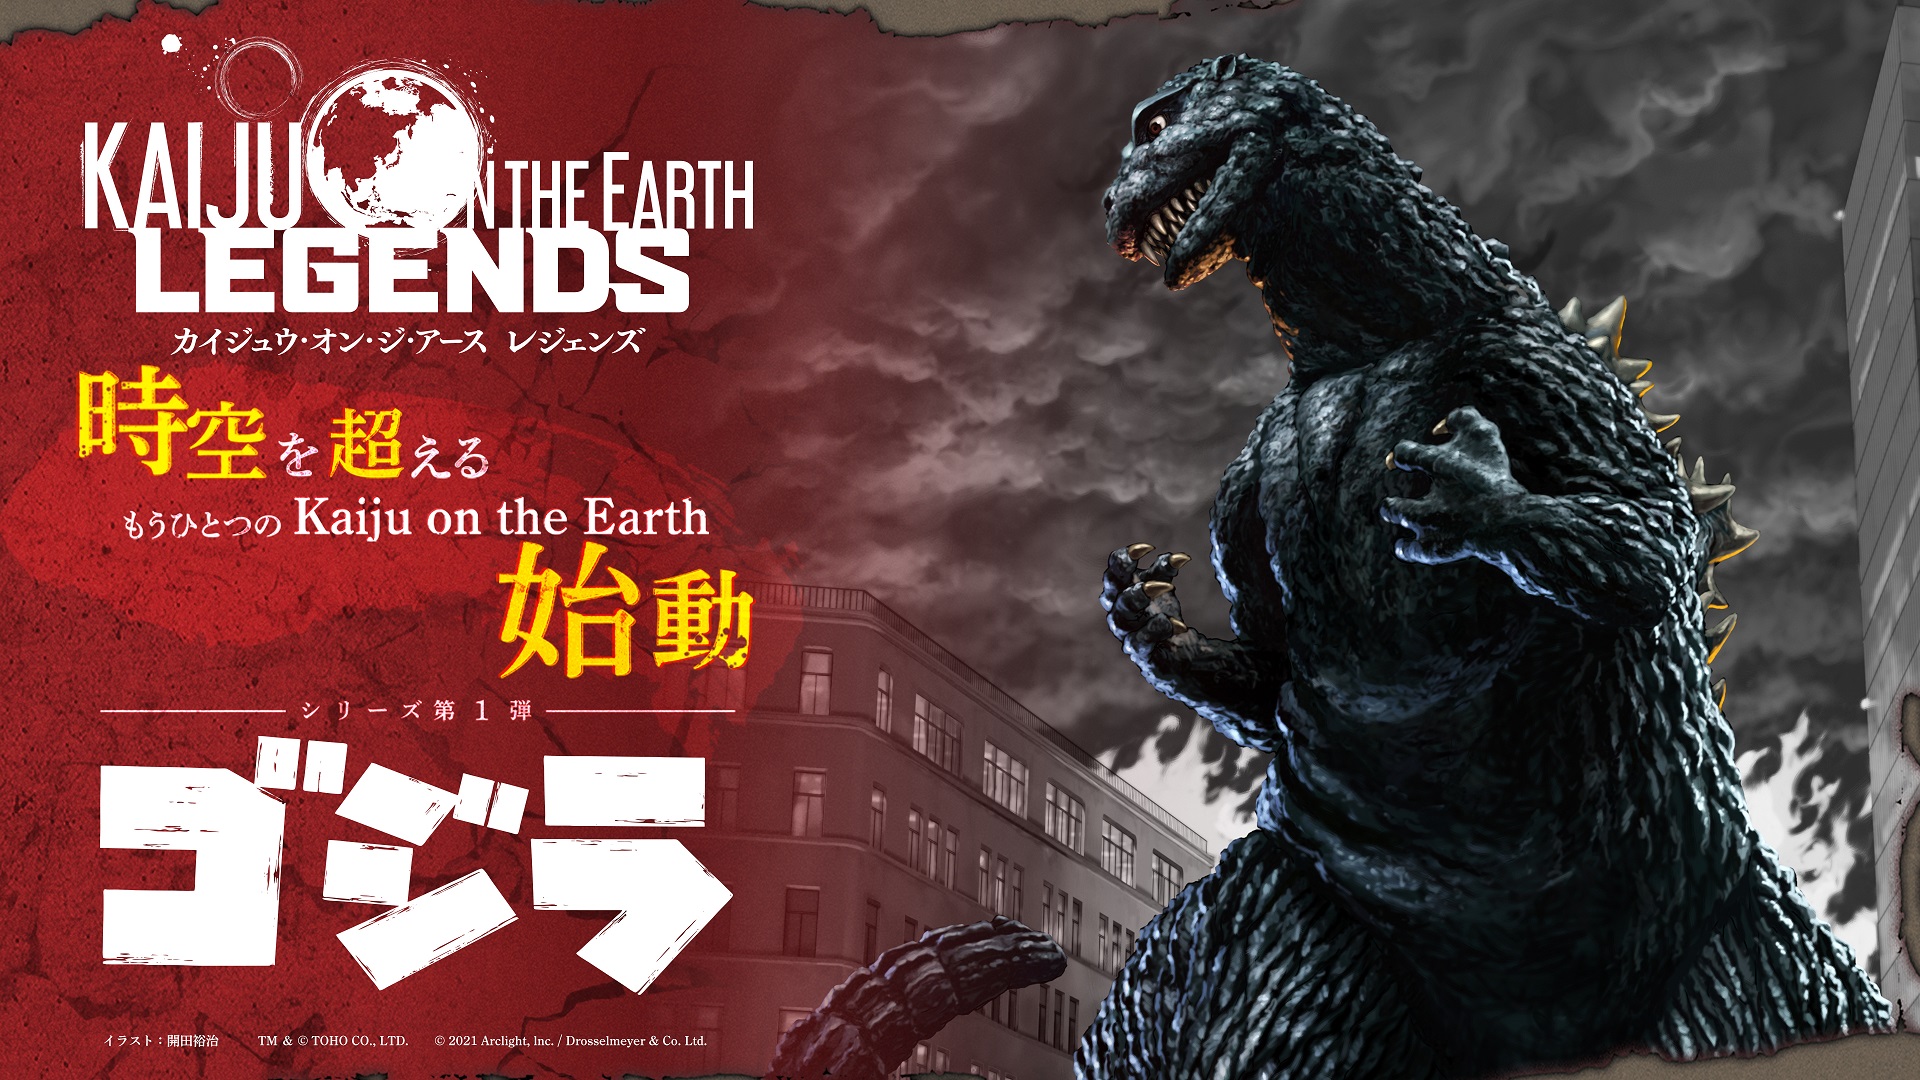 Godzilla Attacks in a MONSTER-SIZED Collaboration with GRAND